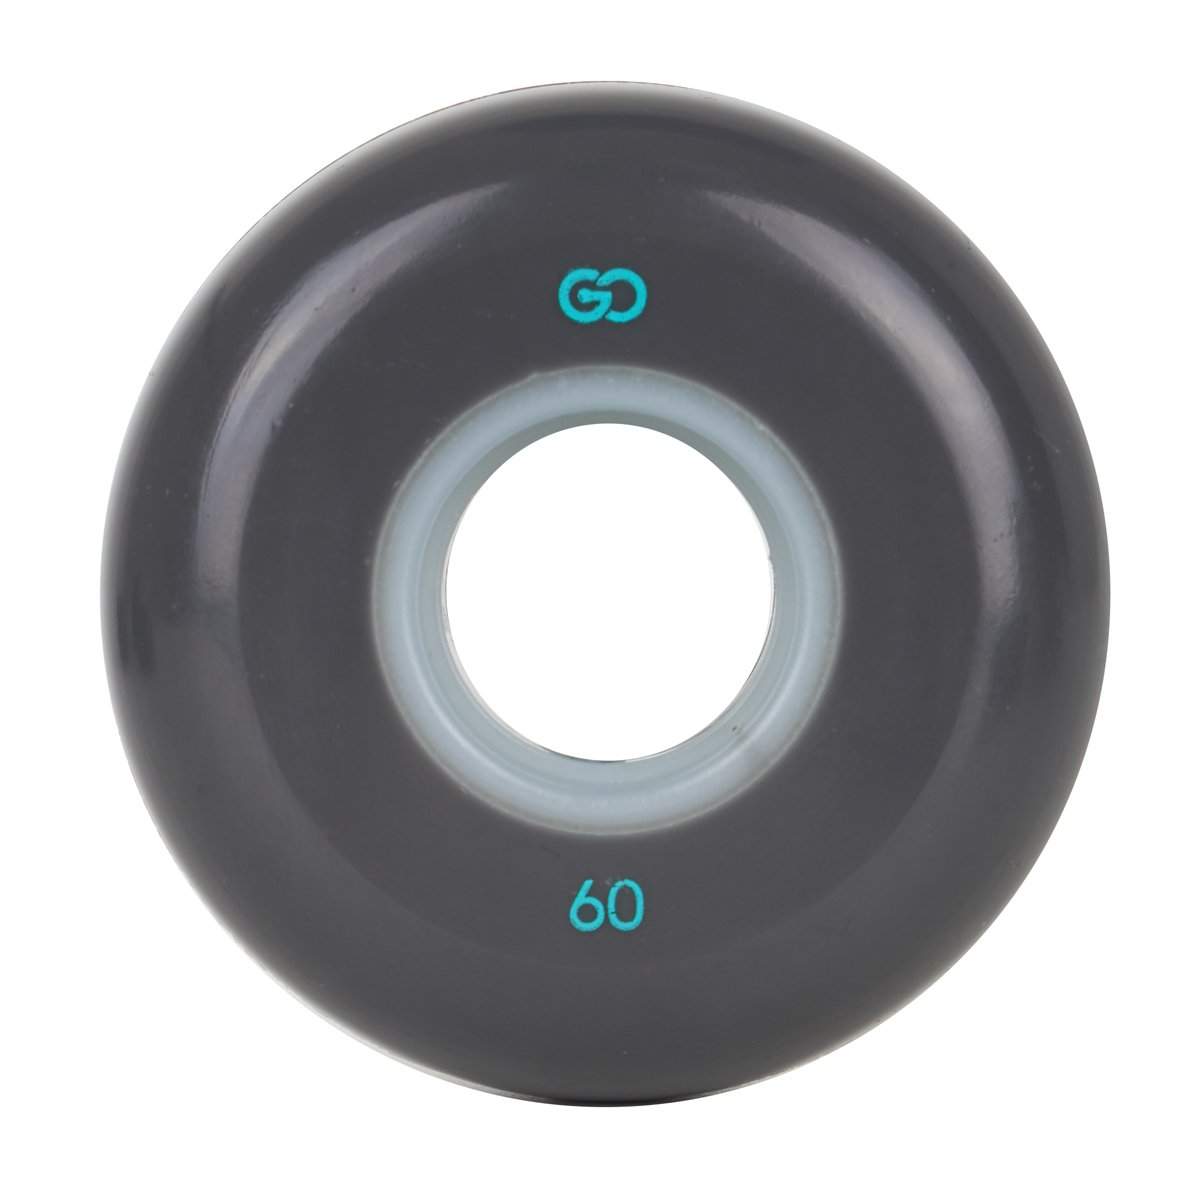 Go Project Grey Wheels 60mm (4 Pack)